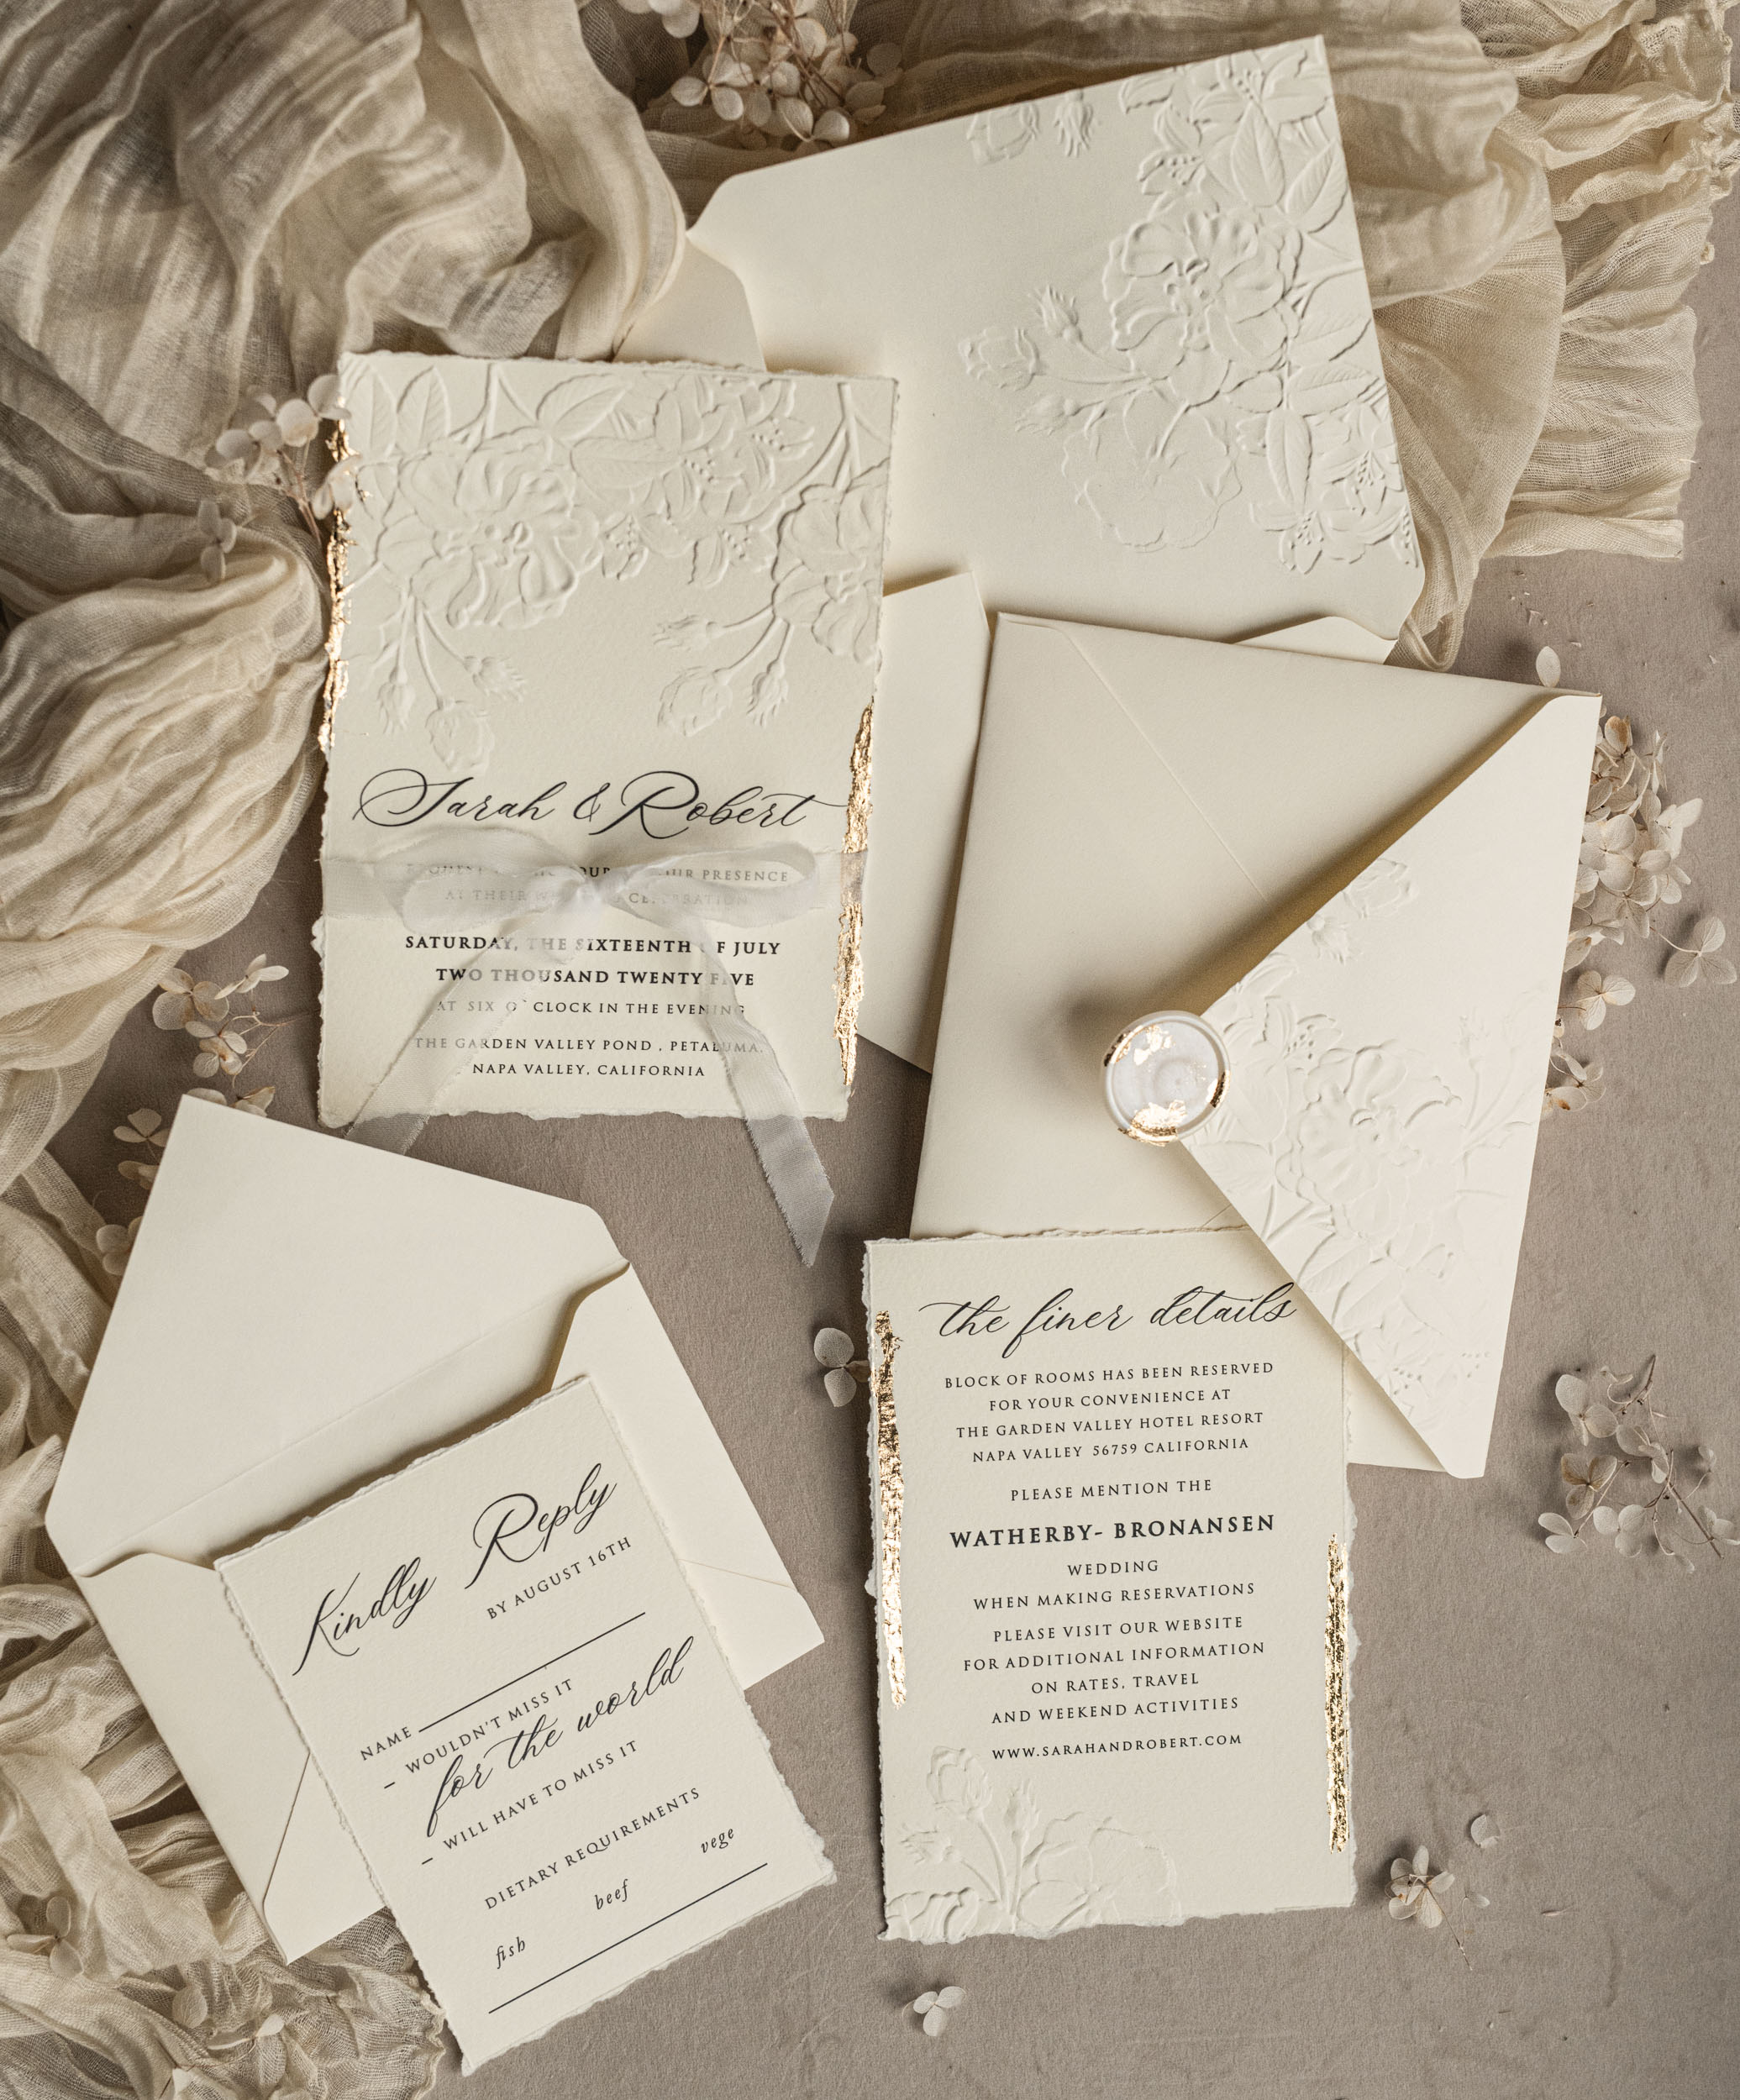 Ivory & Gold Elegance: Fine Art Embossed Wedding Invitations with Torn Edges, Floral Engraving, and Gilded Details